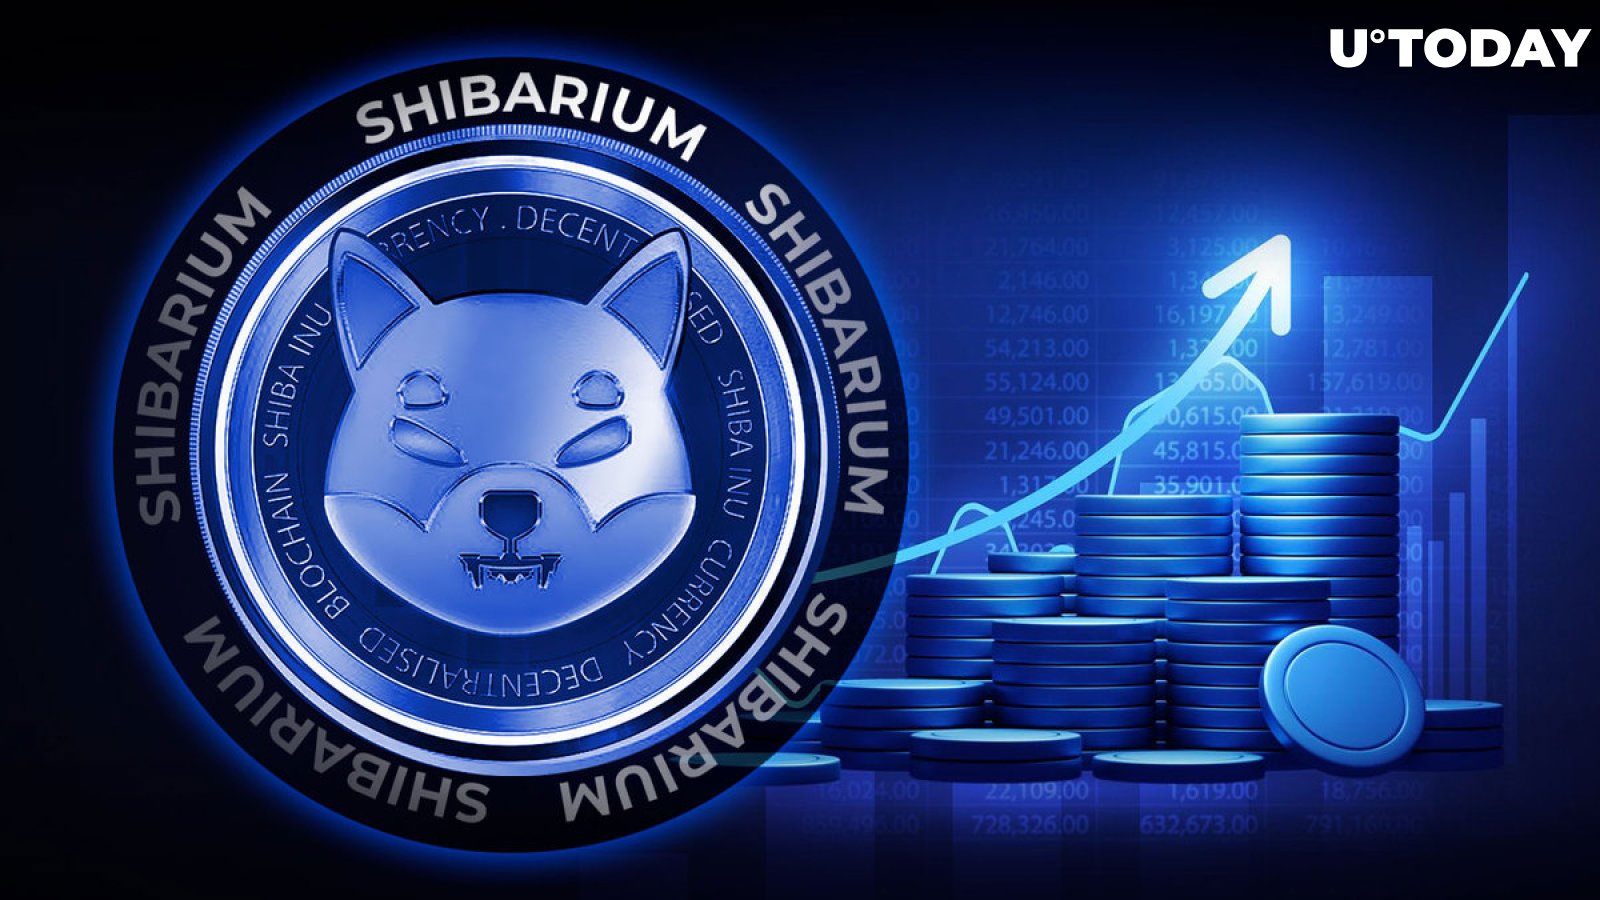 Shiba Inu Sees 50% Surge in Shibarium Activity as SHIB Price Finds Key Support